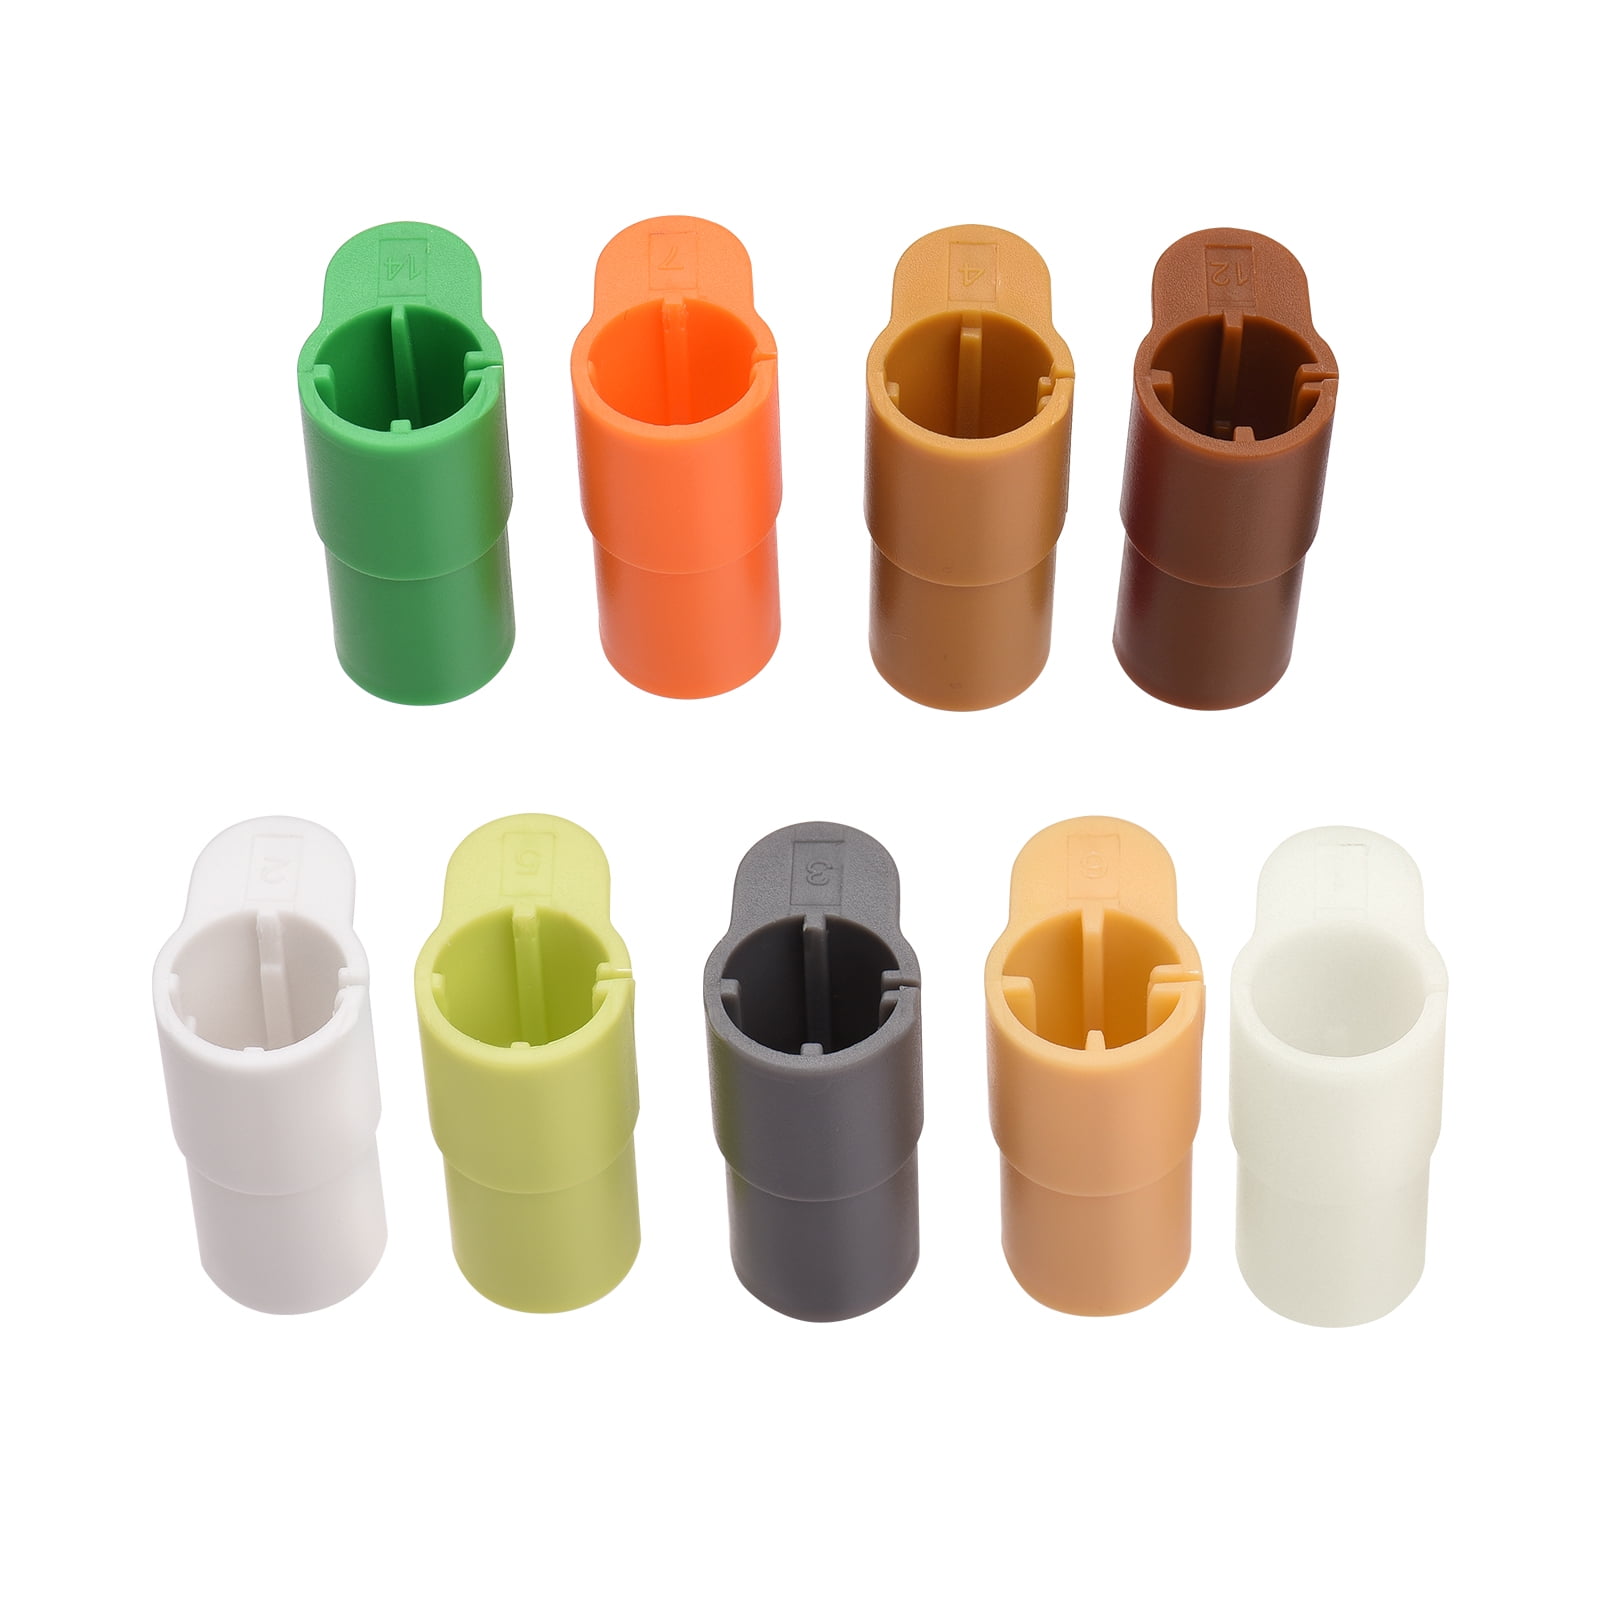 Sharpie Oil-based Paint Marker Pen Adapter for Cricut Machines explore Air 3,  2, & Maker Great for Dark Signs, Posters, and Paper 